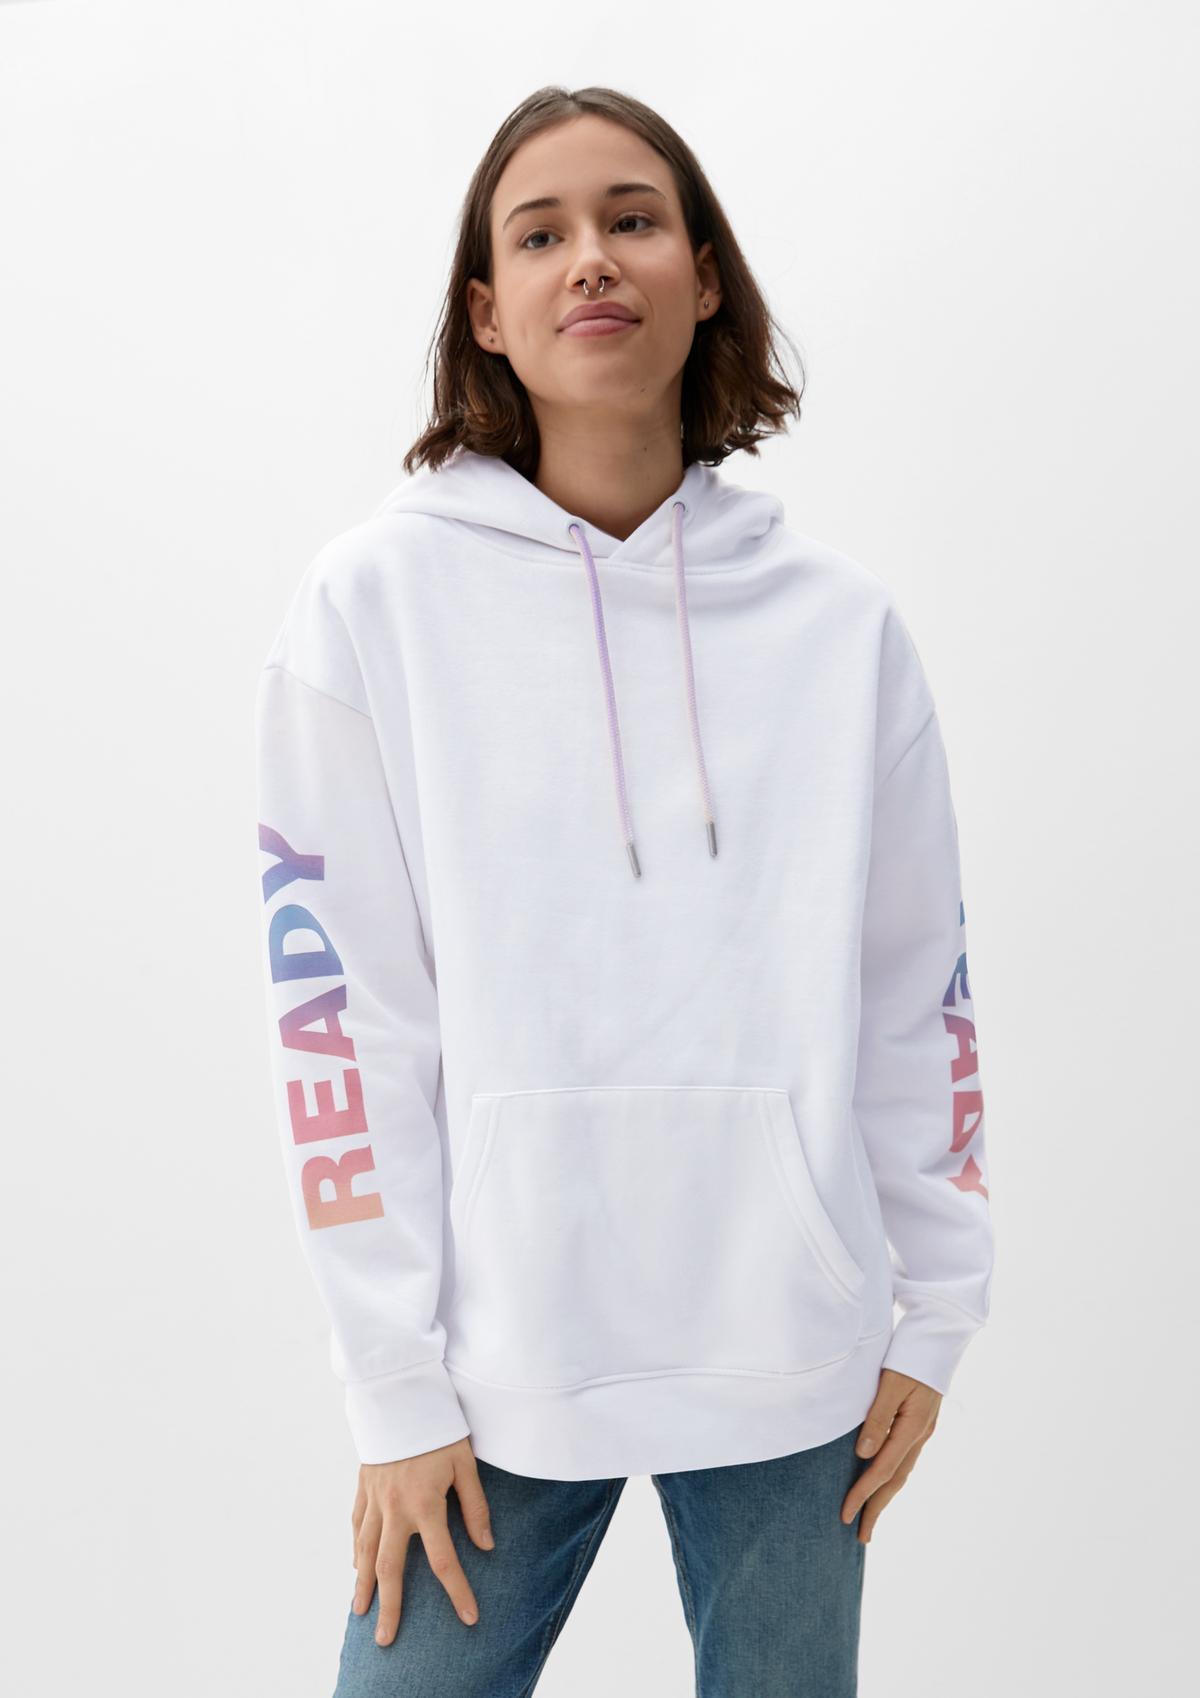 Hooded sweatshirt with white - a back print